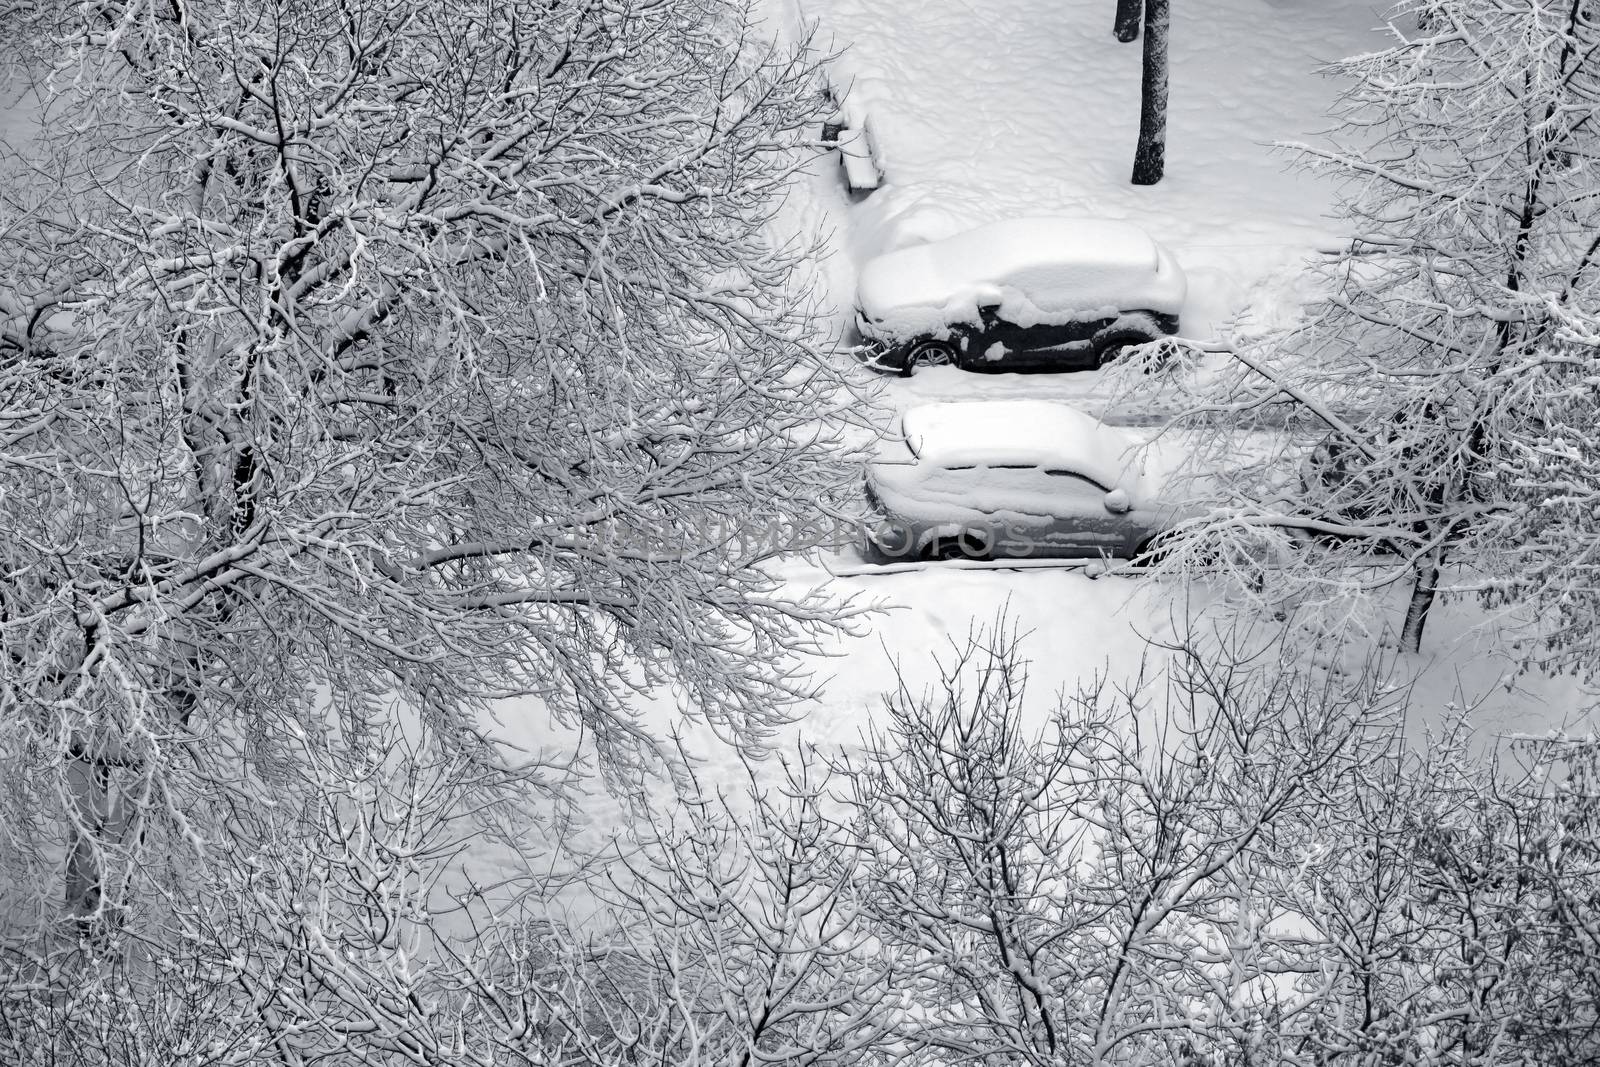 Winter branchs and car covered with snow